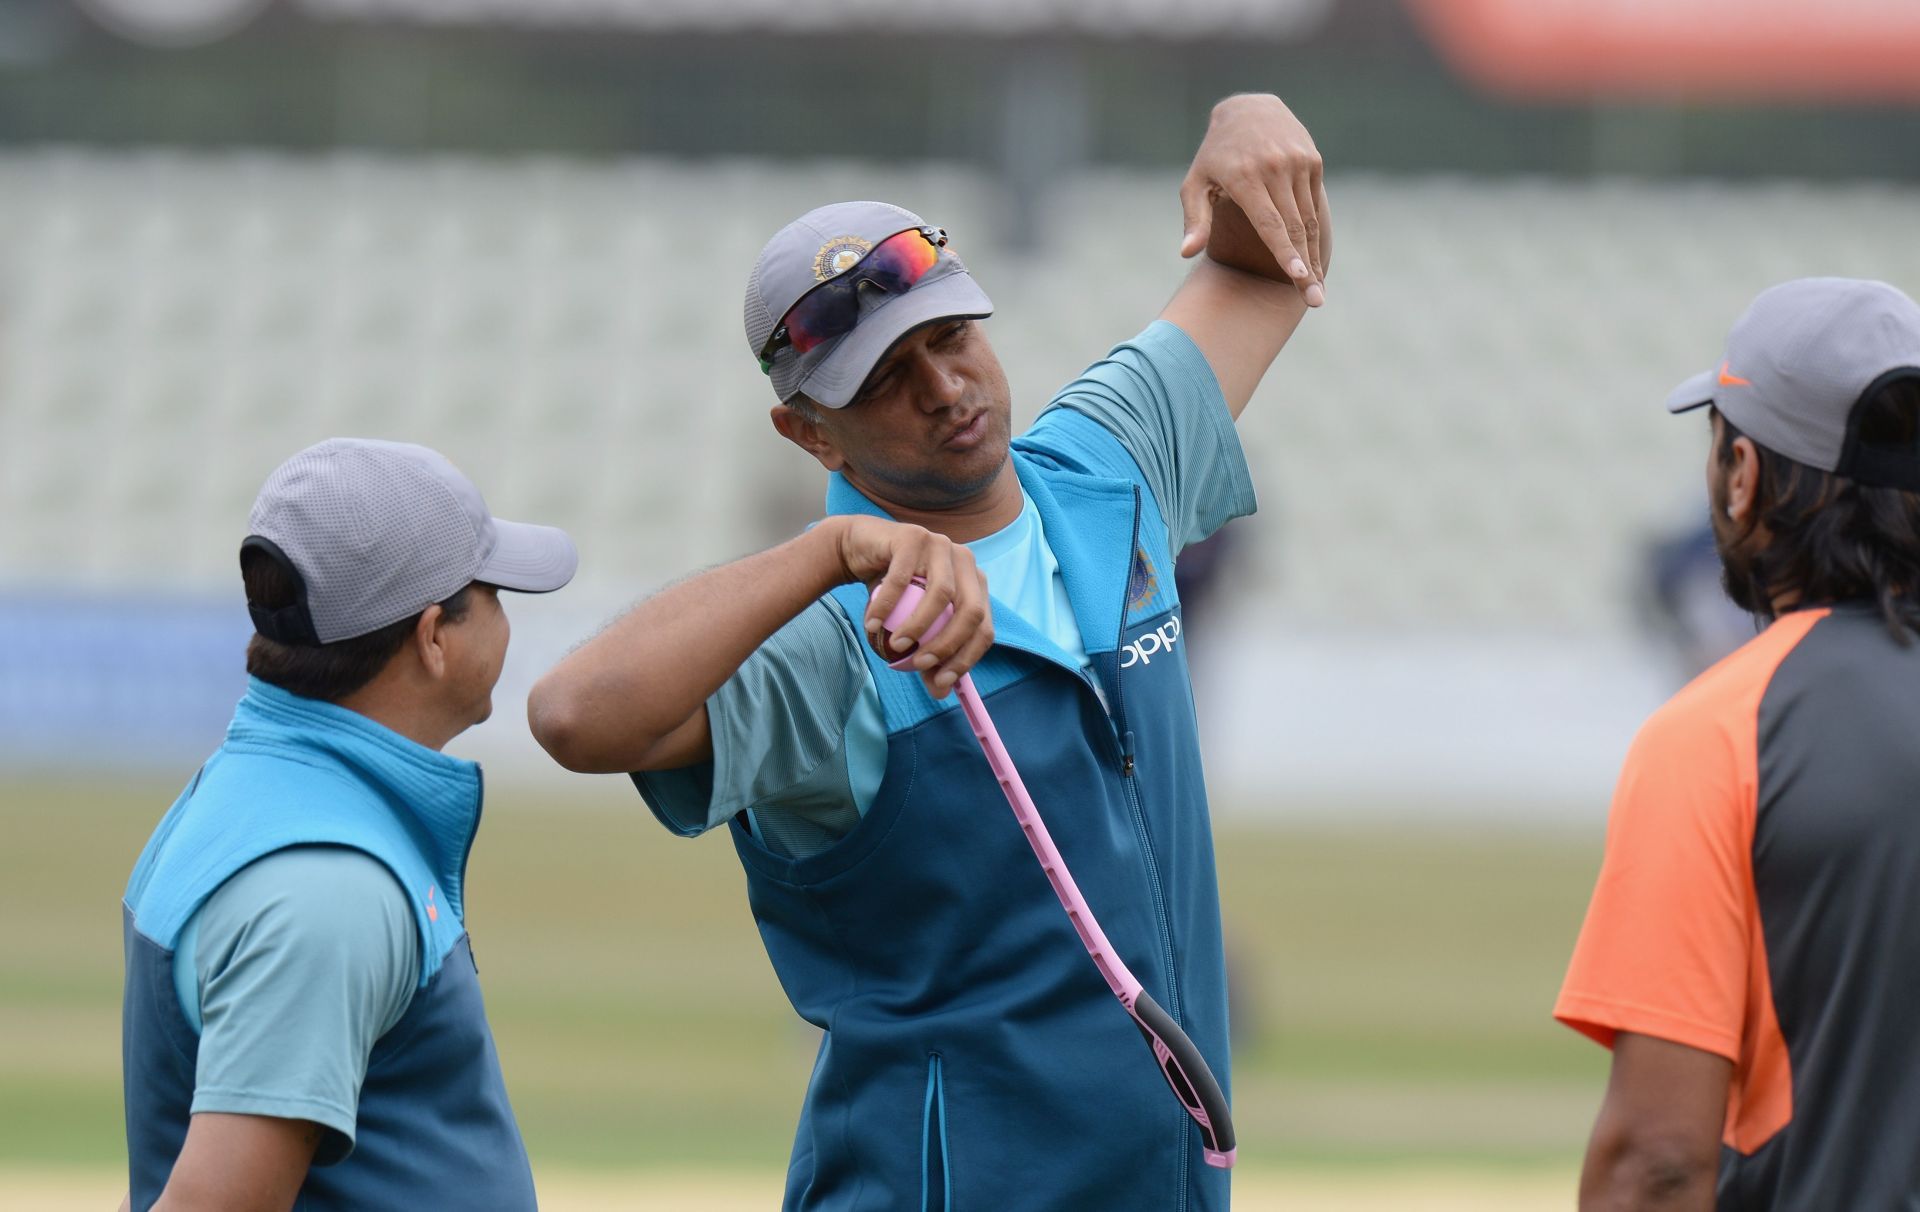 Rahul Dravid took over from Ravi Shastri as the head coach of the Indian team